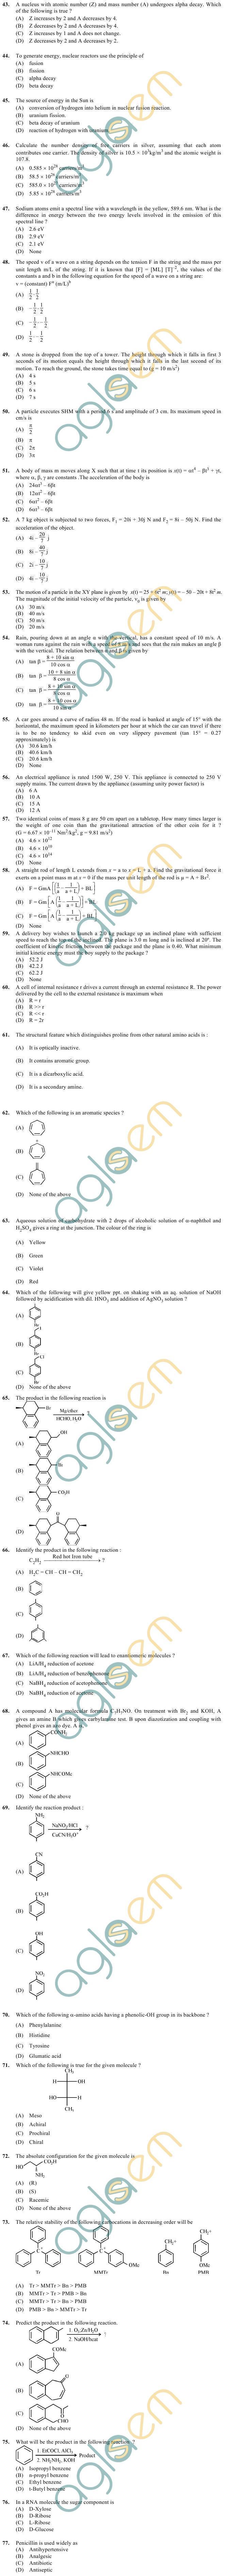 OJEE 2013 Question Paper for PHY/CHEM